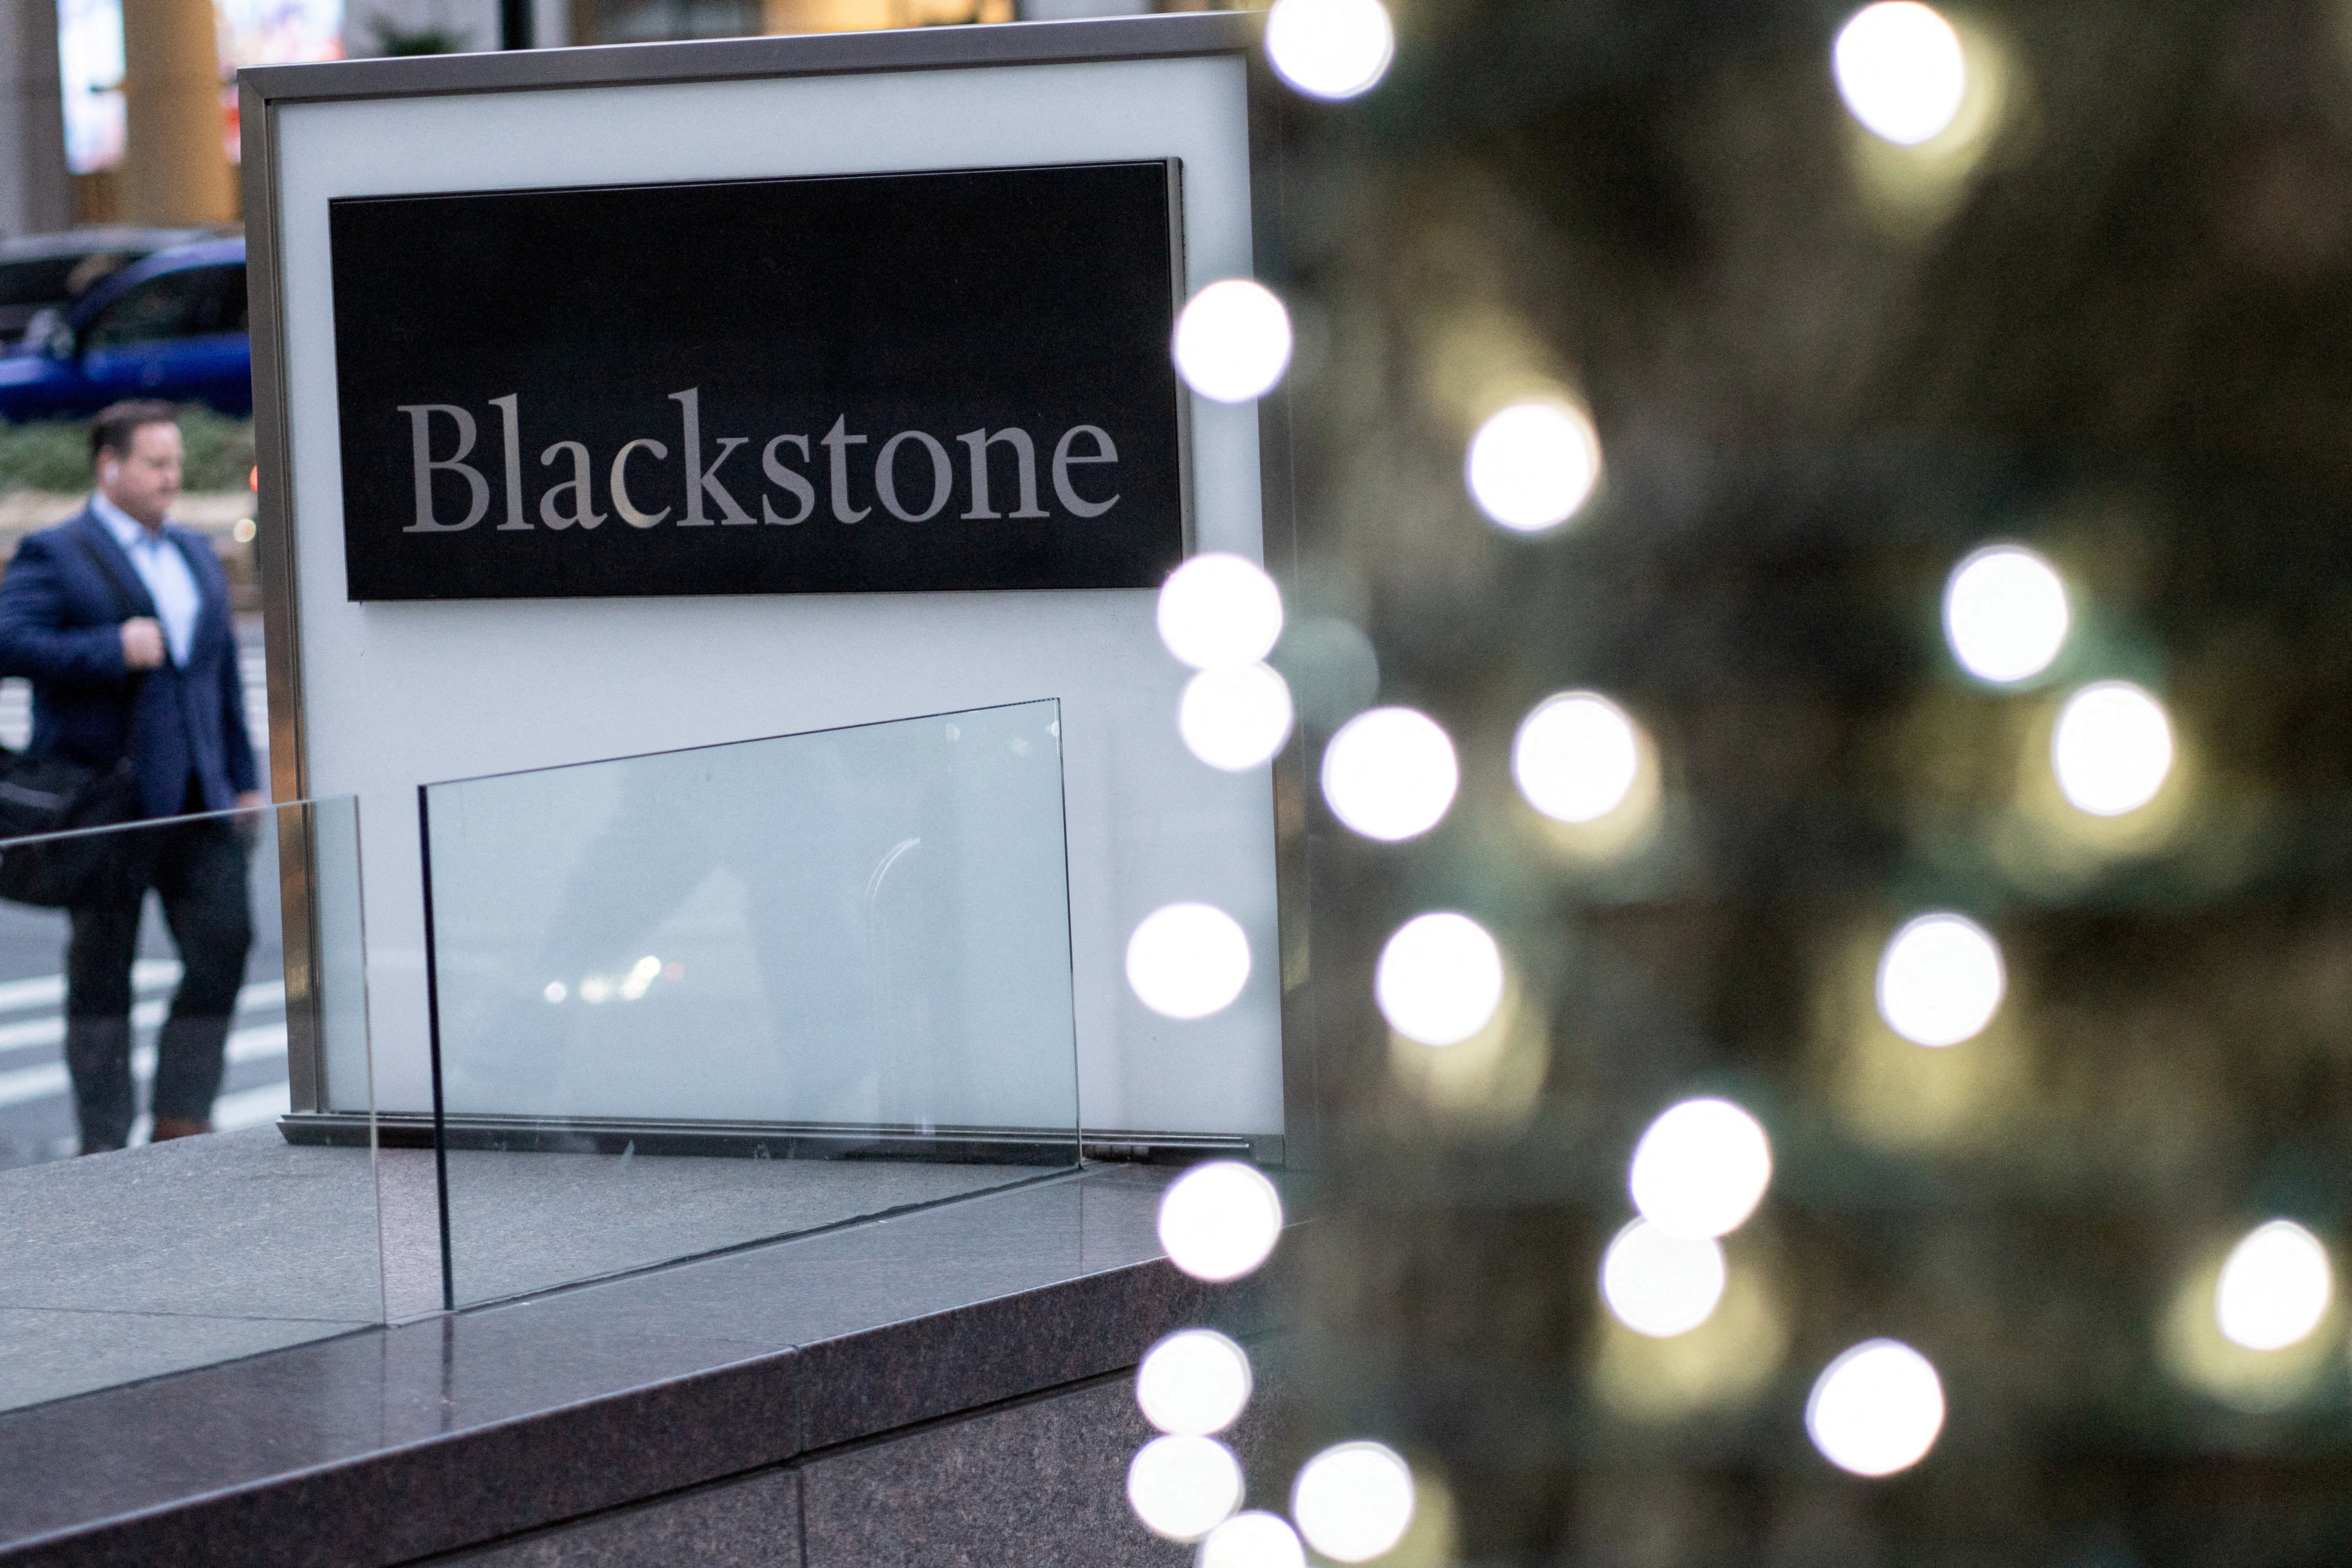 Signage is seen outside the Blackstone Group headquarters in New York City